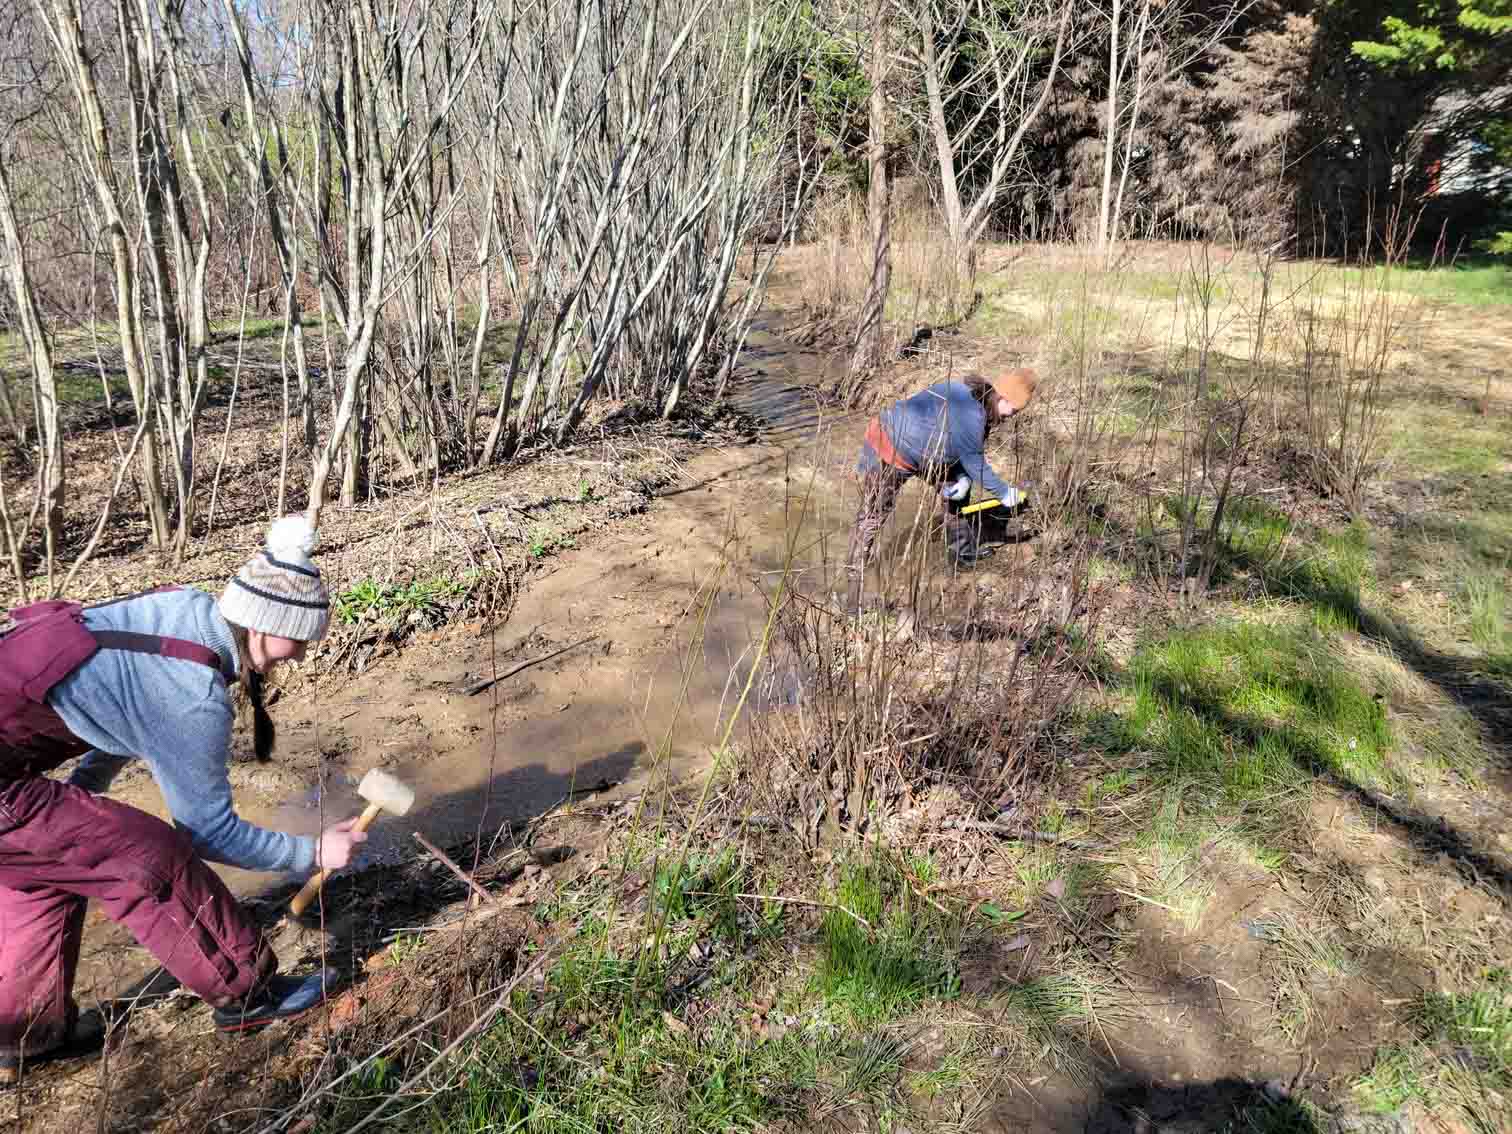 Caitlin Worsham, project manager (foreground) and Christine O'Brien, project assistant, plant livestakes as part of a Lake Junaluska wetland restoration project. (Photo courtesy Haywood Waterways Association)